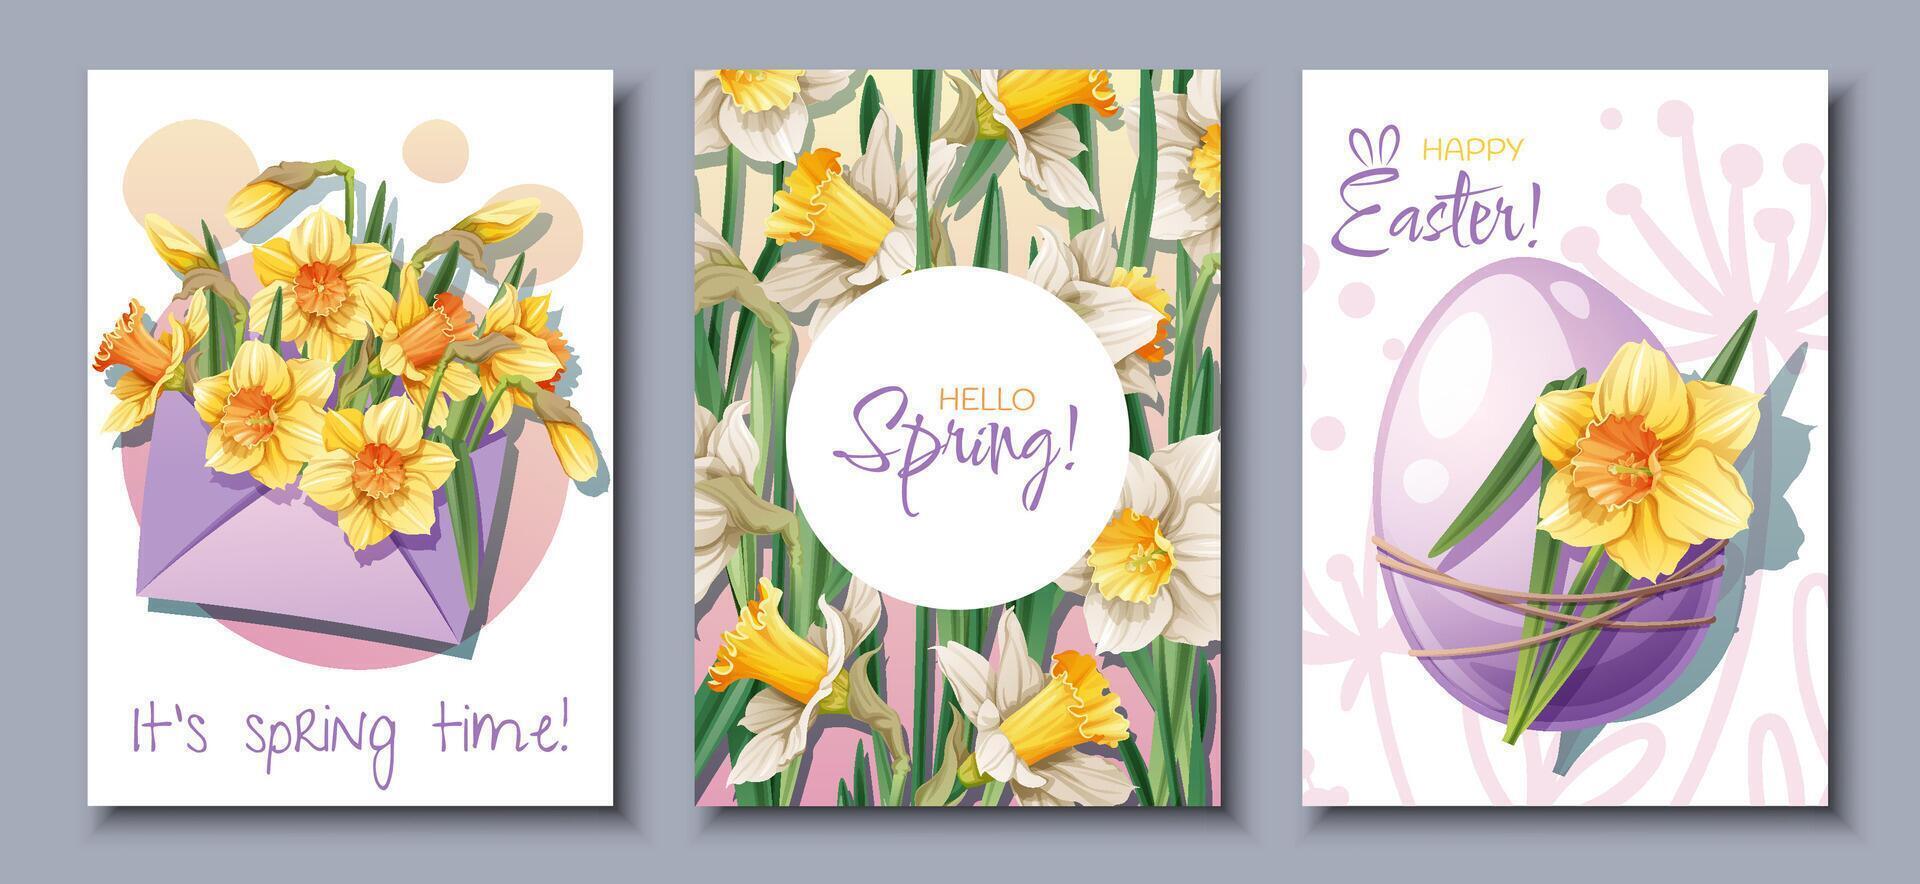 Set of greeting card templates with spring flowers for Easter. Poster, banner with daffodils in an envelope, with an Easter egg. Hello spring. illustration of delicate flowers in cartoon style vector